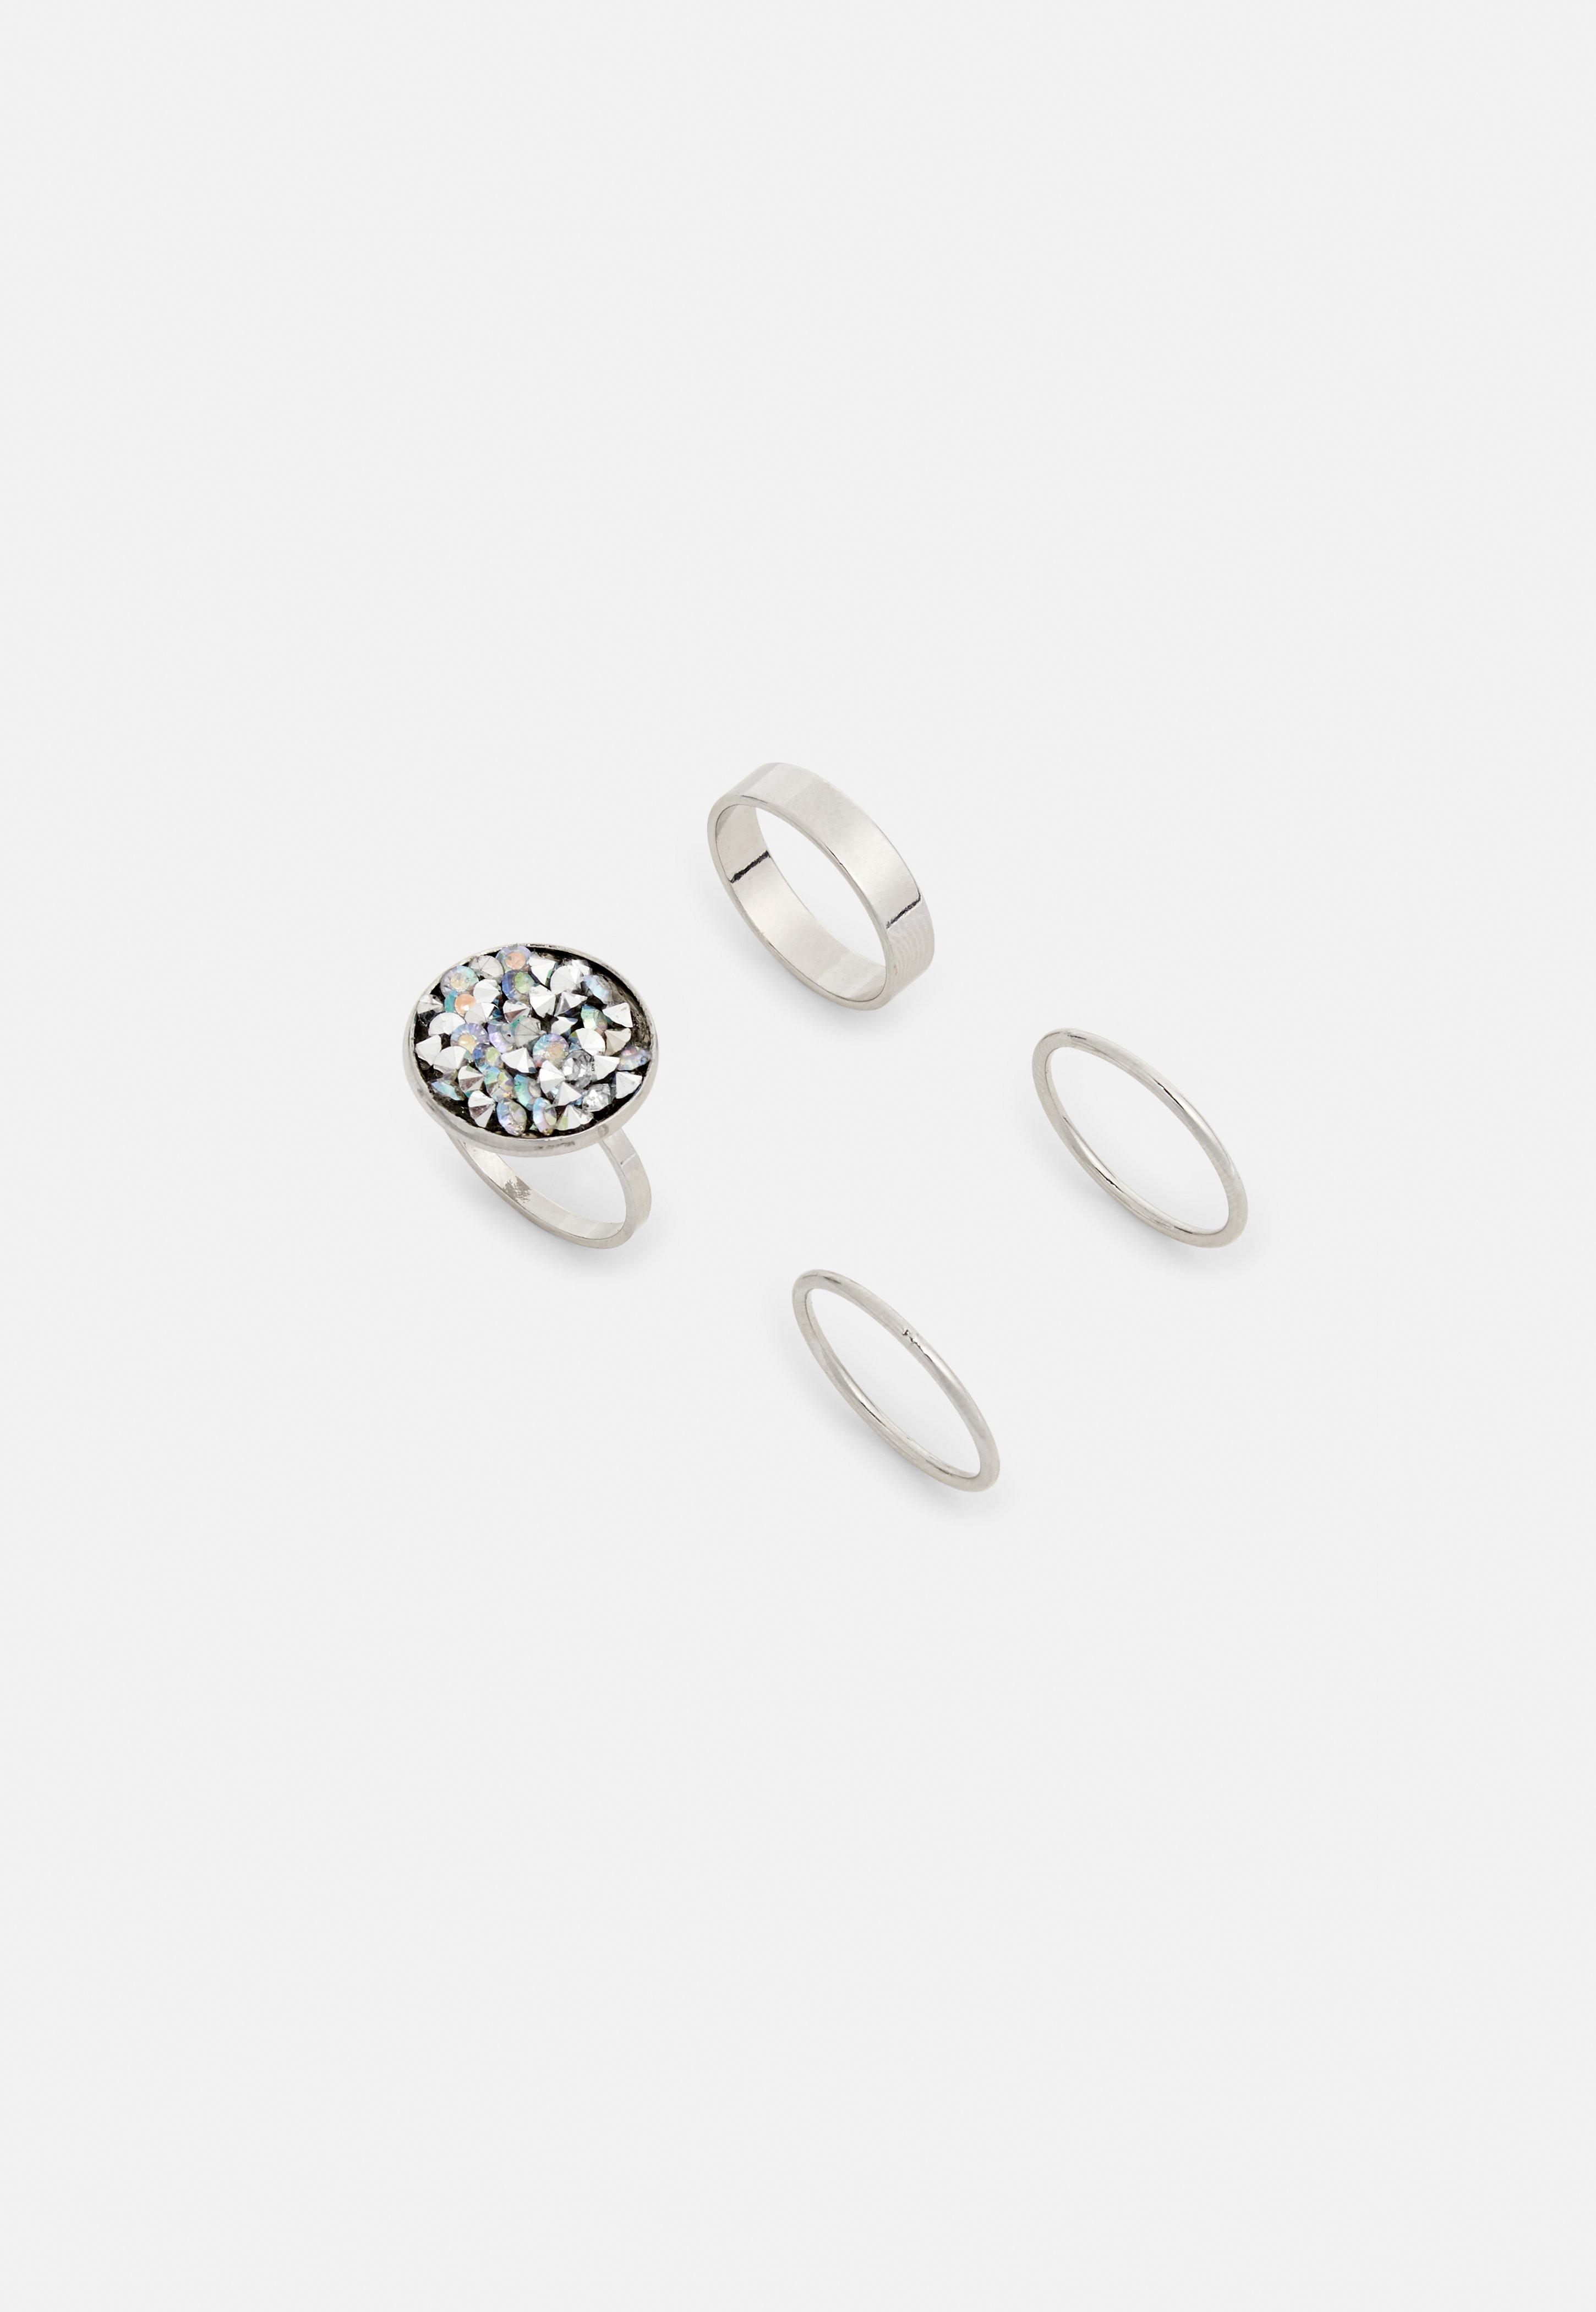 Rings - Women's Fashion & Statement Rings | Missguided